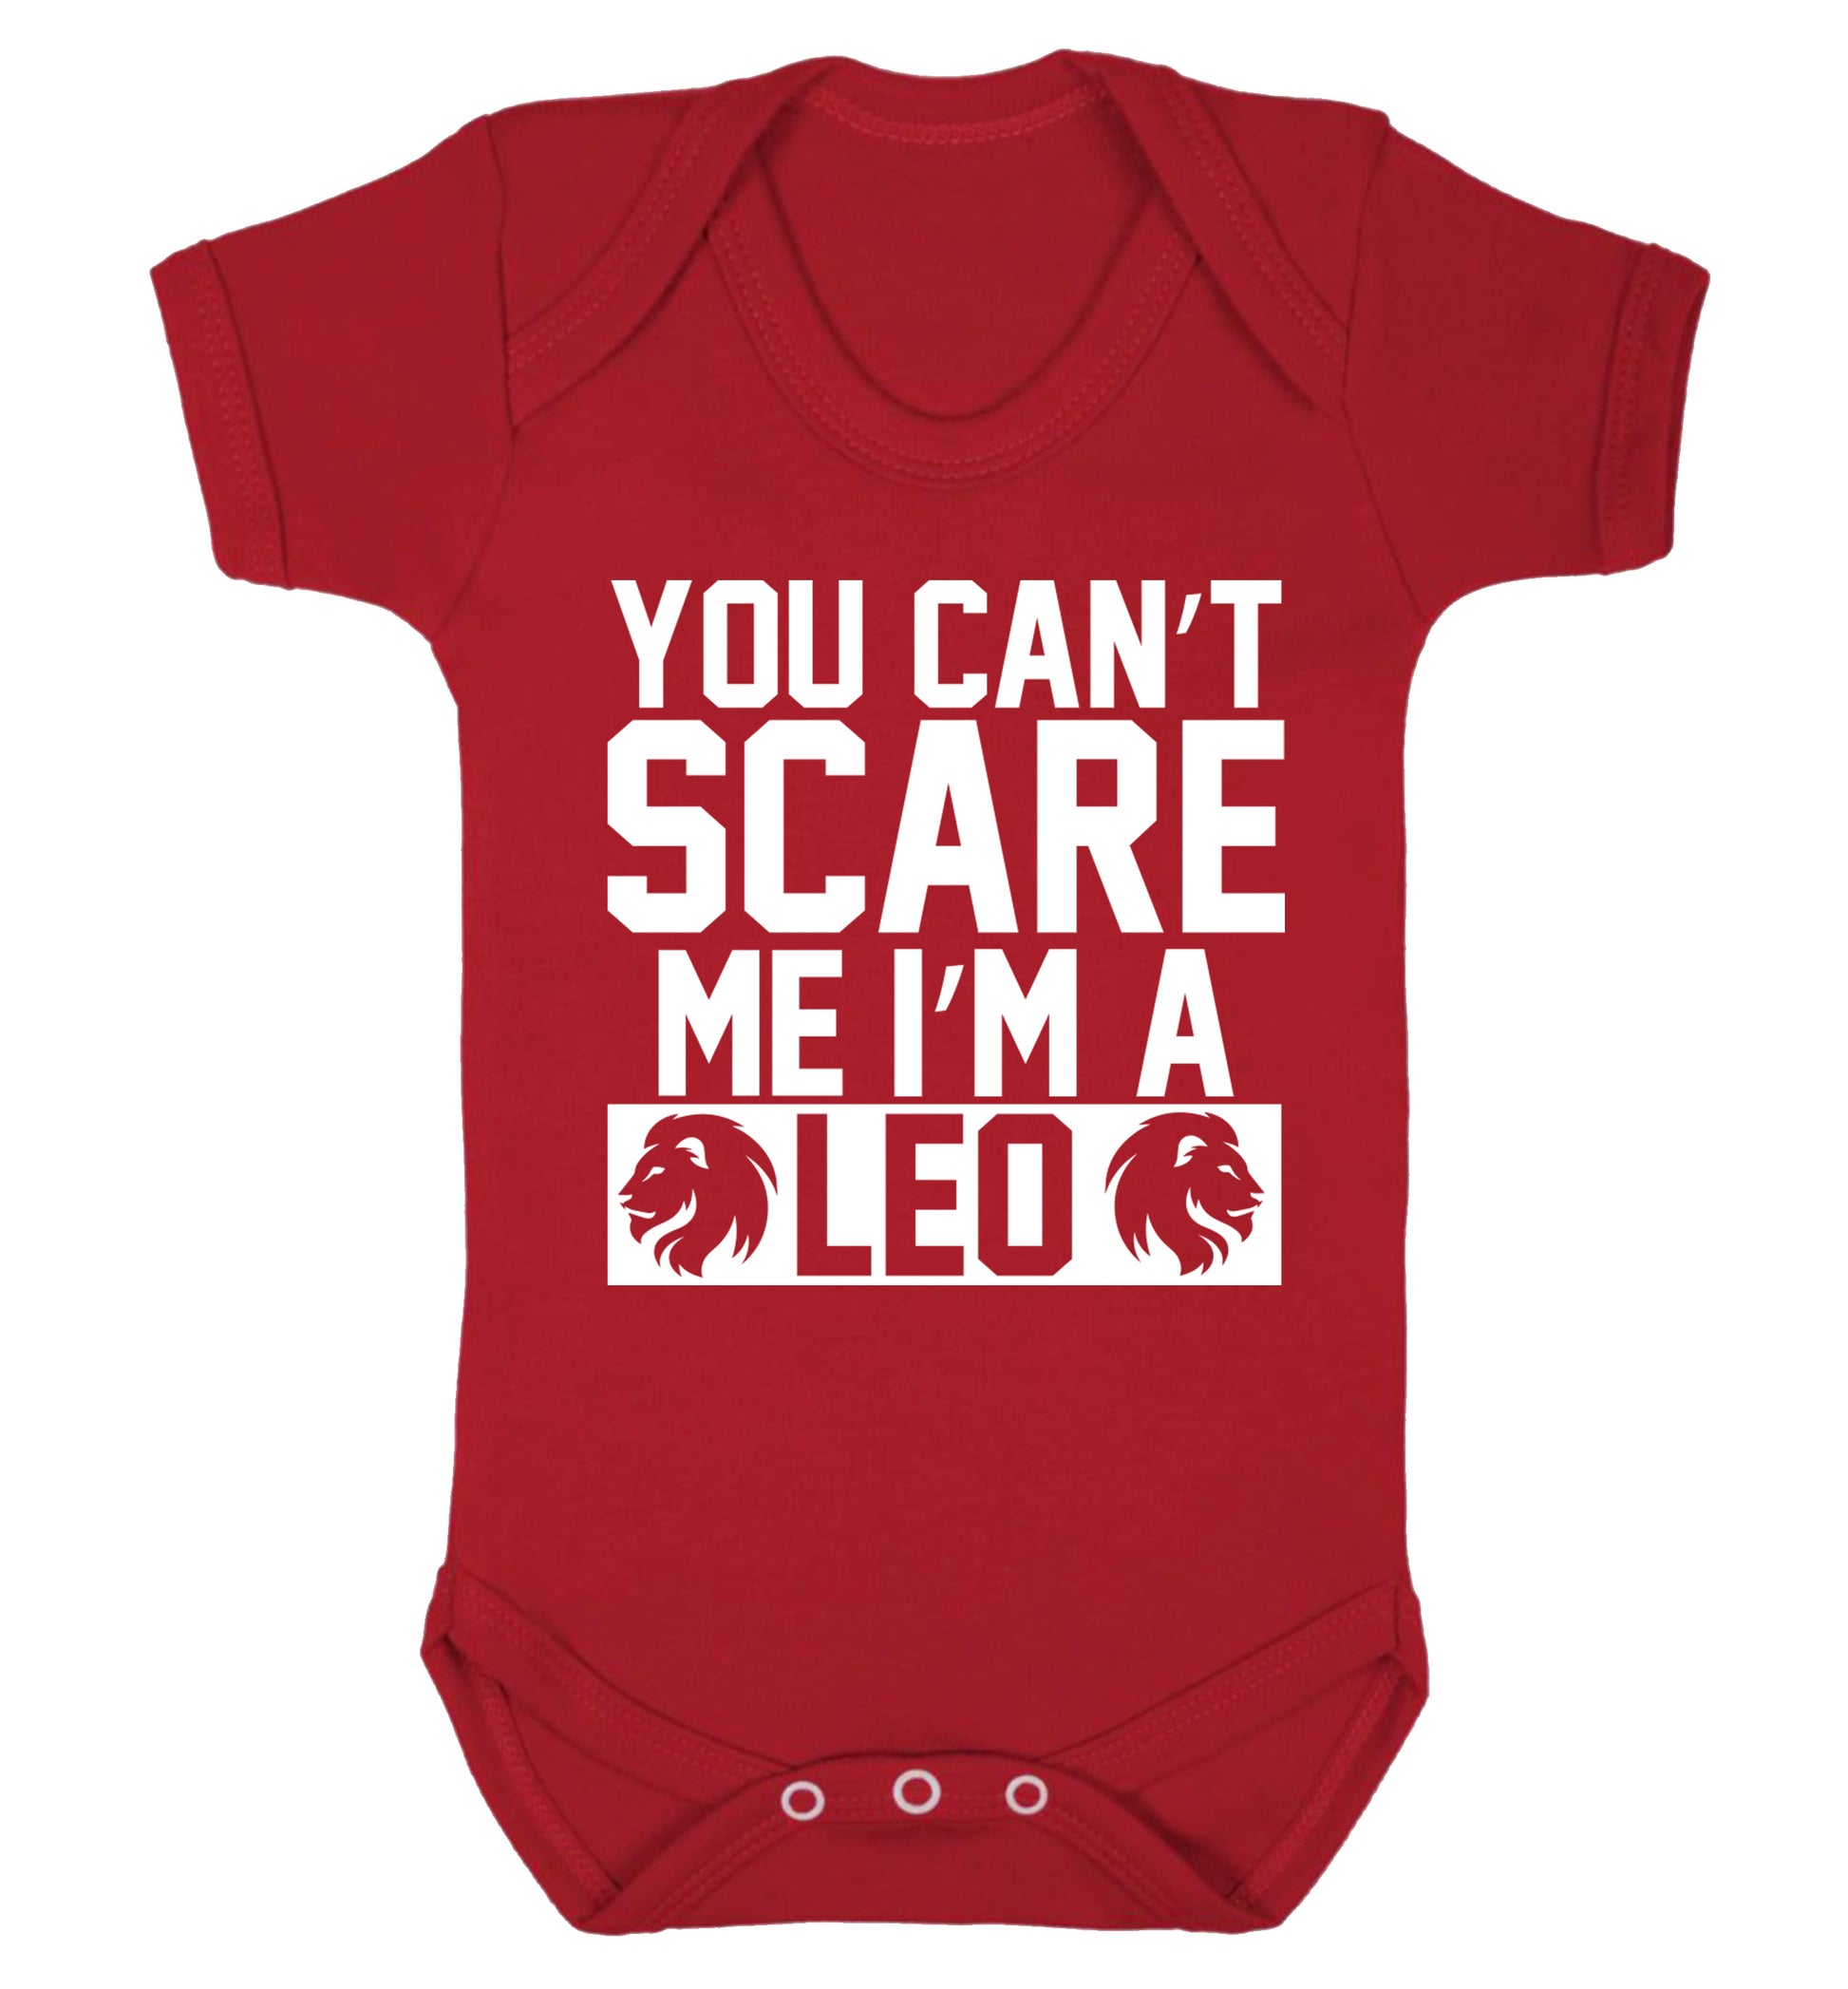 You can't scare me I'm a leo Baby Vest red 18-24 months